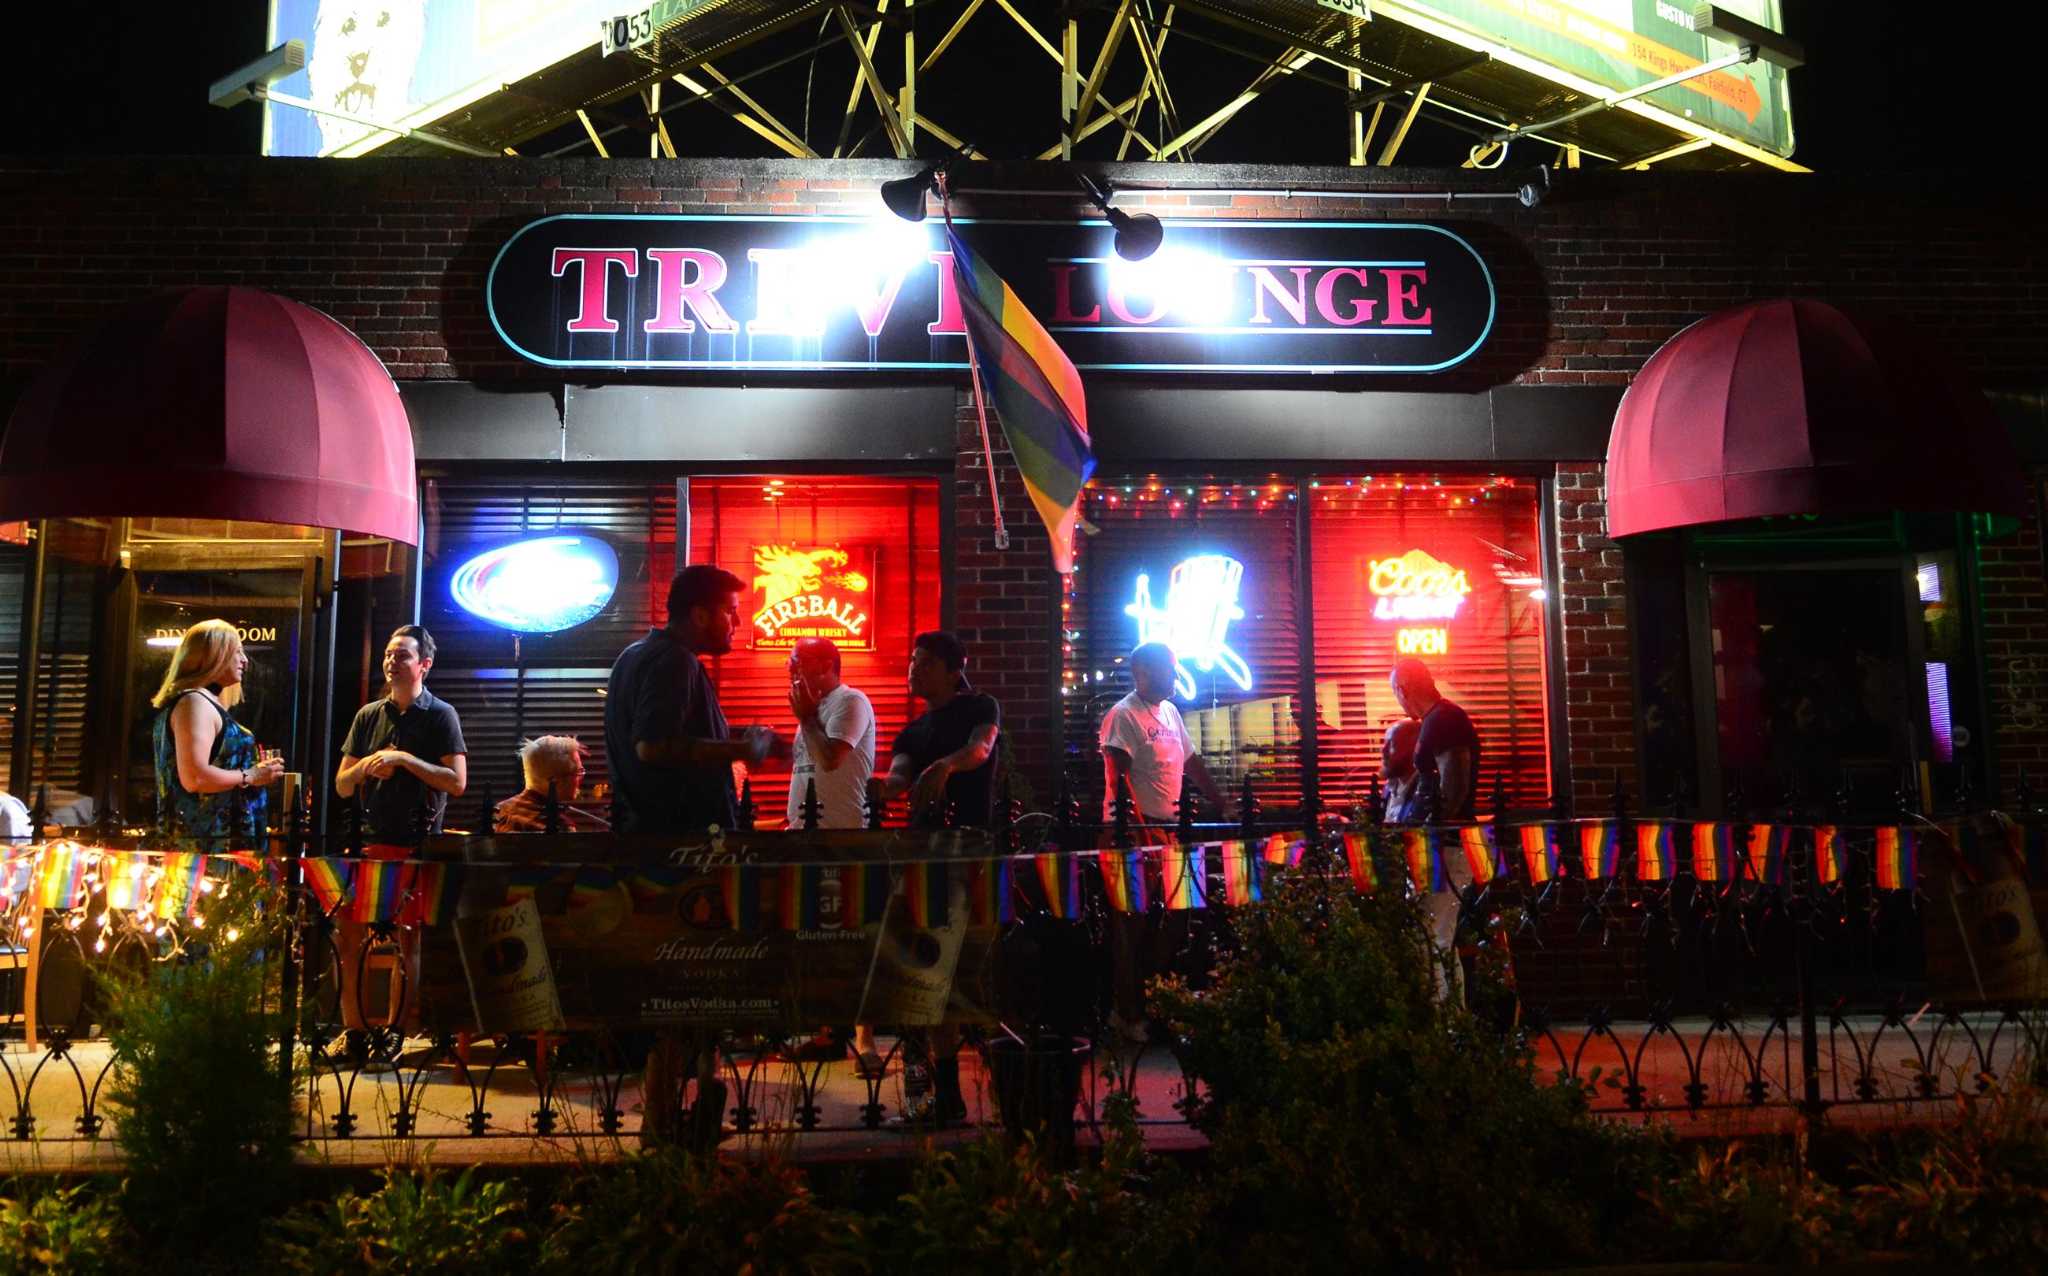 A Look At The Culture Of Gay Bars And LGBTQ Nightlife In CT